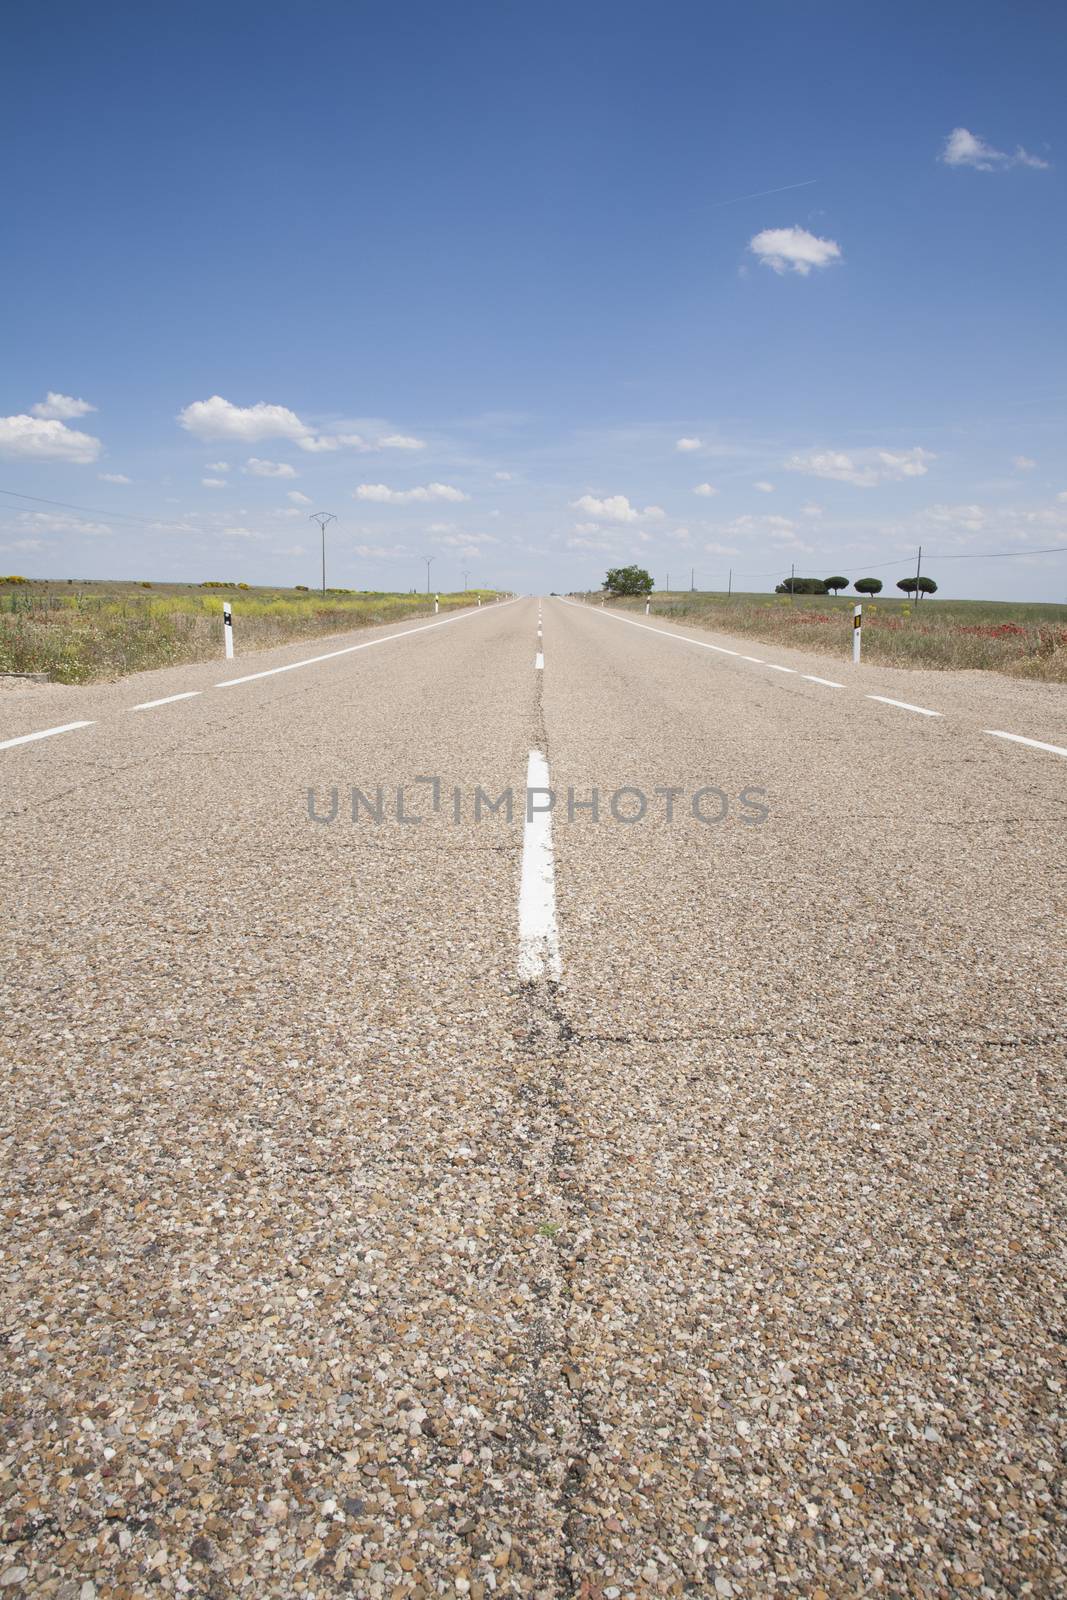 road, roadway, traffic, travel, asphalt, transport, transportation, Spain, horizon, freedom, journey, freeway, destination, route, cloud, blue, roadside, direction, white, straight, Europe, grey, drive, verge, sky, driving, way, country, rural, countryside, outdoor, outside, landscape, nobody, green, line, lane, scene, nature, land, narrow